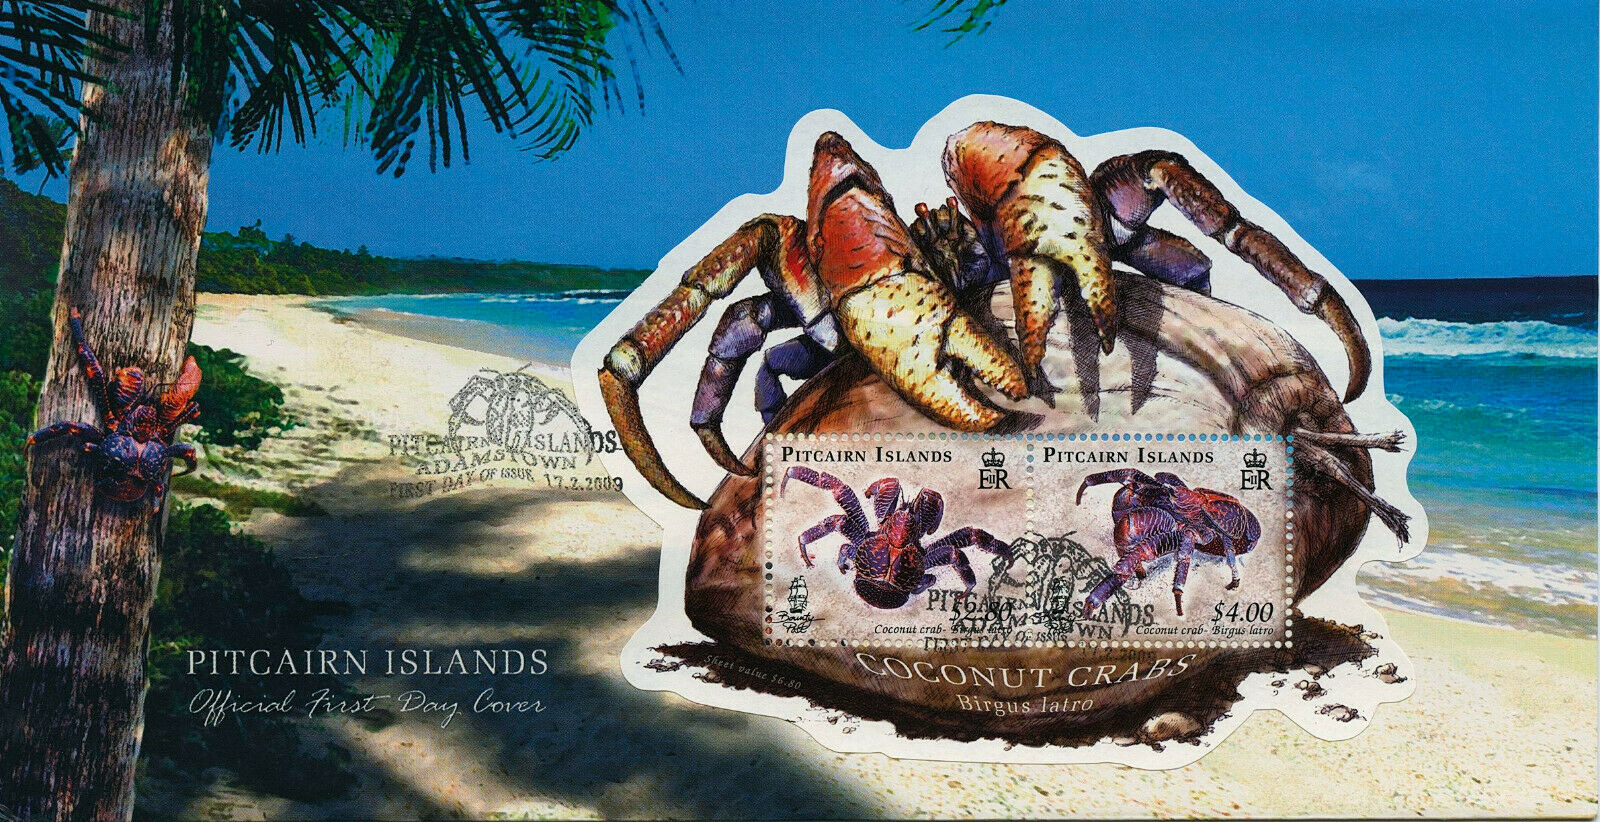 Pitcairn Islands 2009 FDC Crabs Stamps Coconut Crab Crustaceans 2v M/S